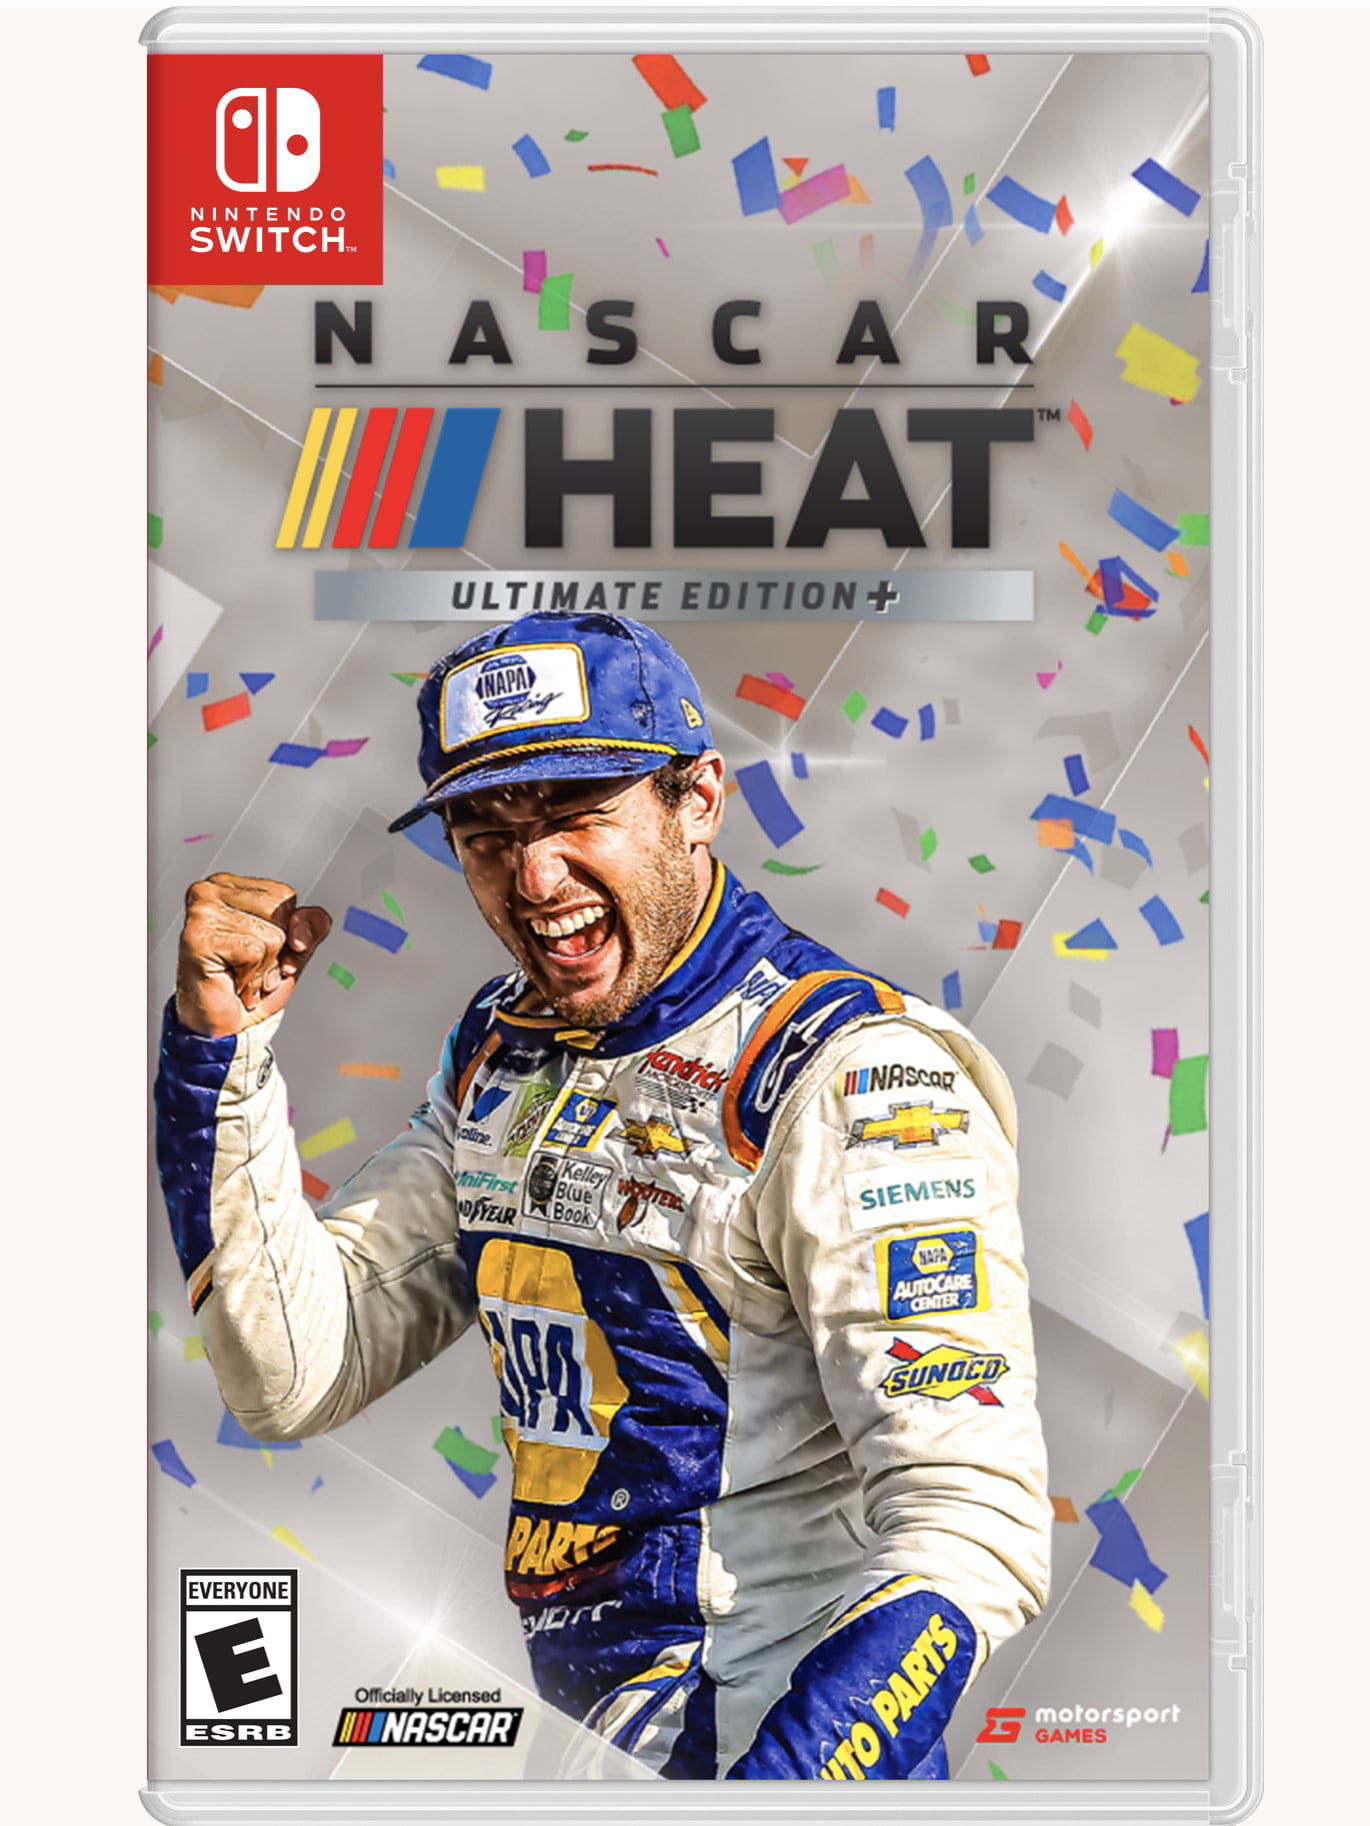 NASCAR Heat: Ultimate Edition+ (Nintendo Switch, Physical) $19.93 + Free Shipping w/ Walmart+ or $35+